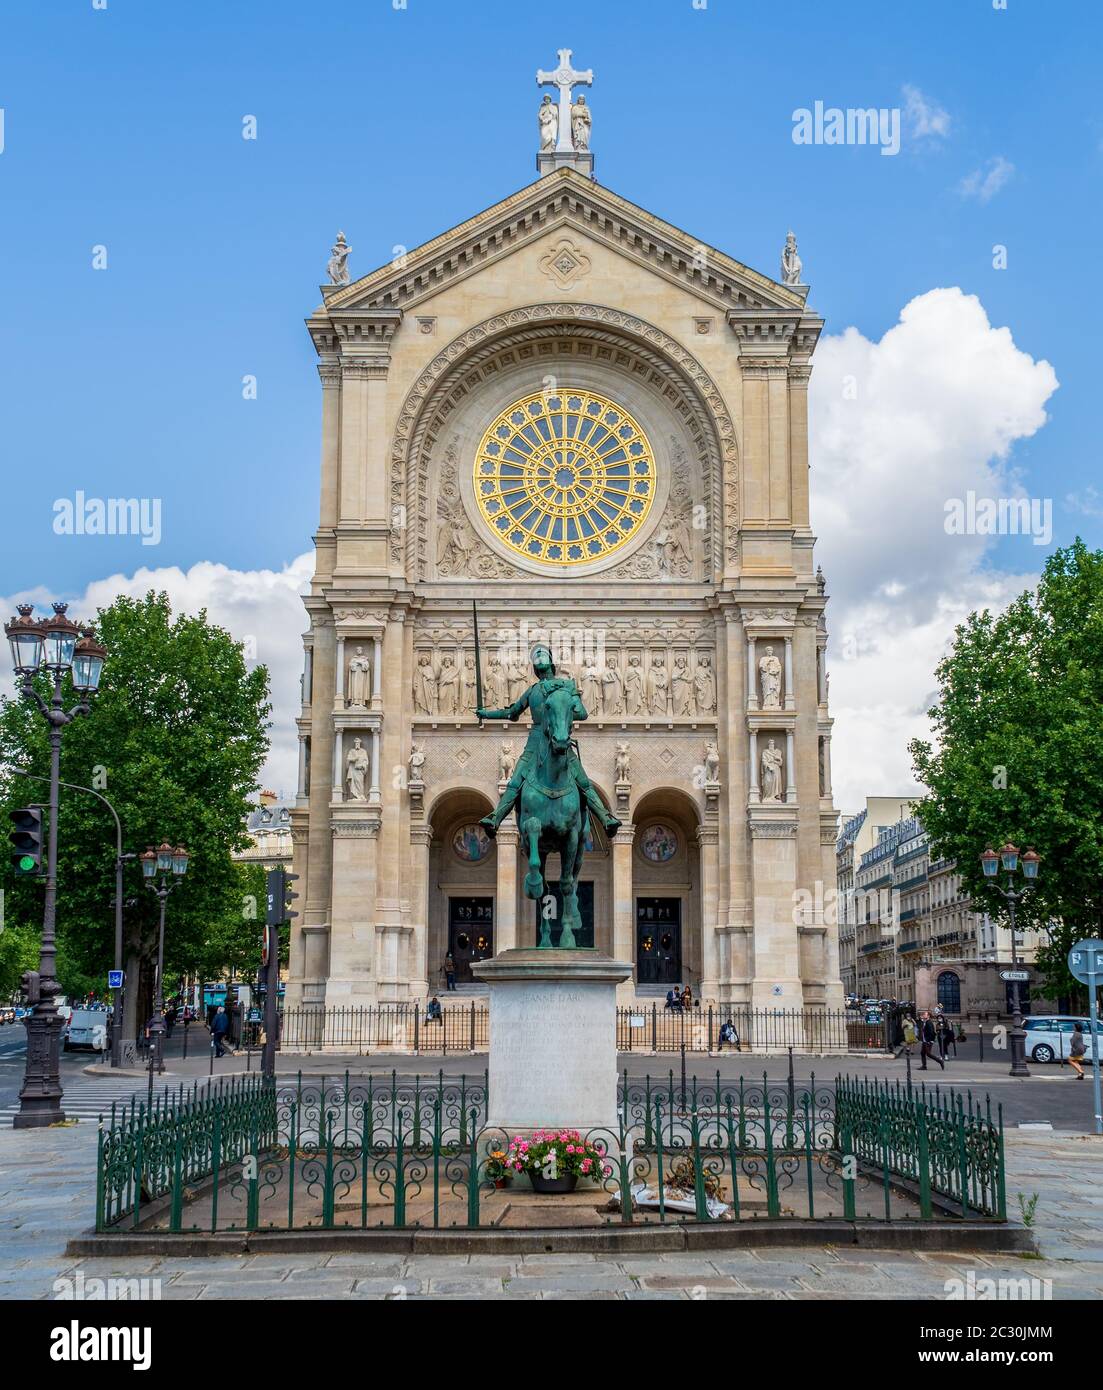 Statue of Jeanne d'Arc with Church of Saint Augustin in the background - Paris Stock Photo